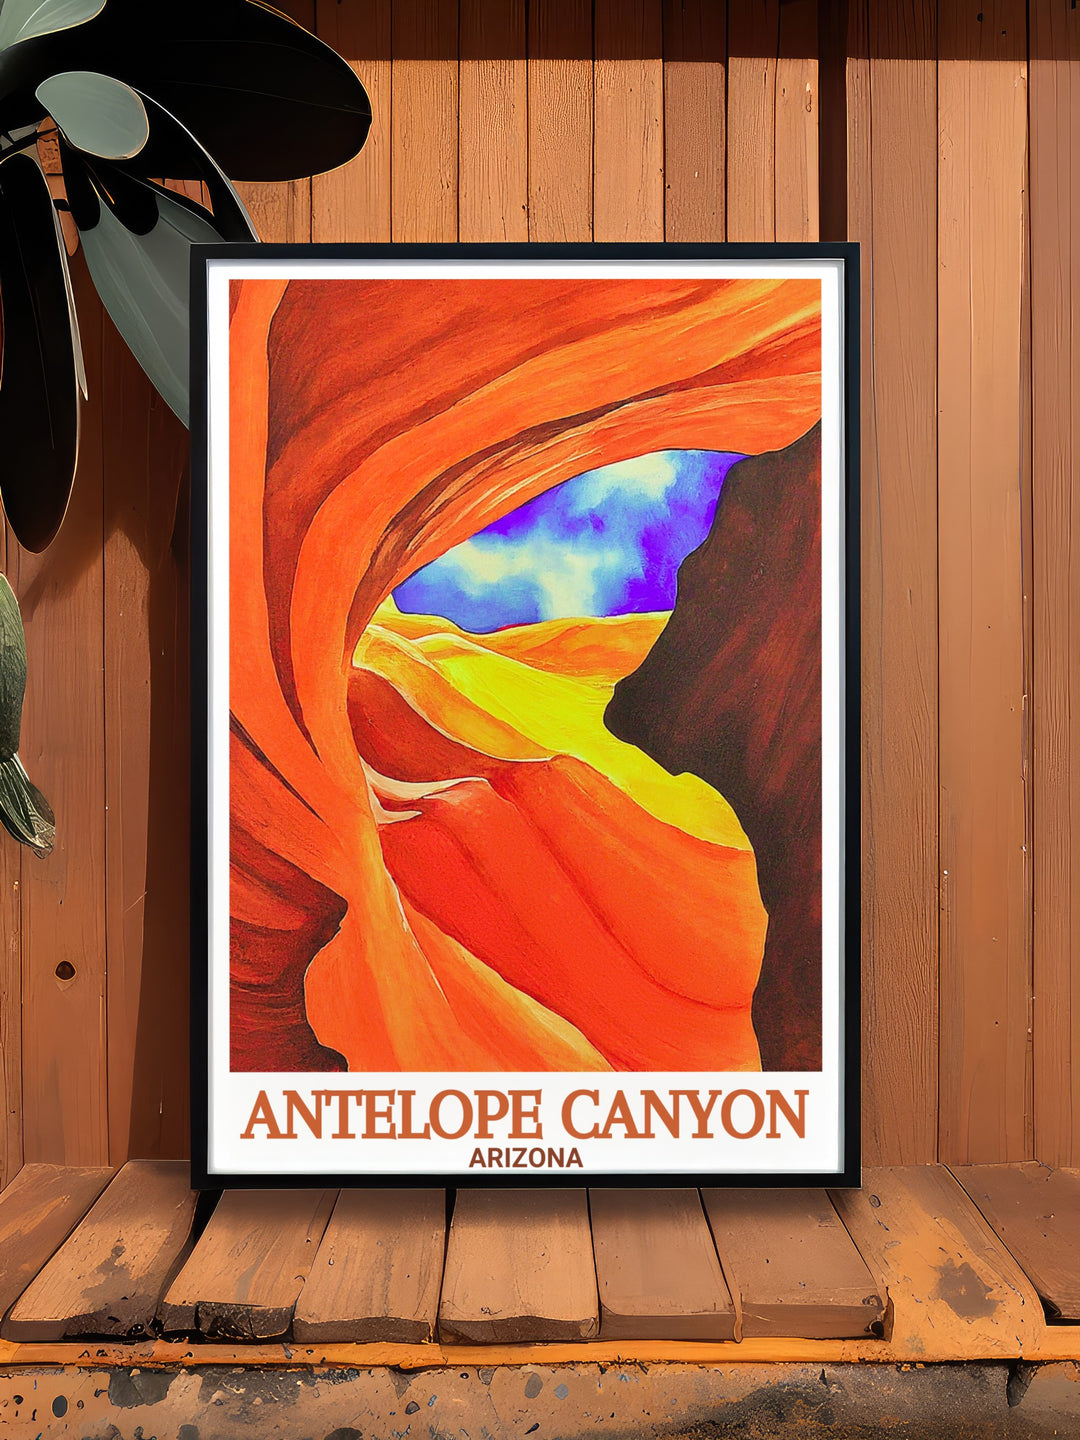 Antelope Canyon decor piece capturing the unique shapes and vivid hues of this iconic Arizona slot canyon a perfect addition to your home or office for those who appreciate the beauty of natural landscapes.